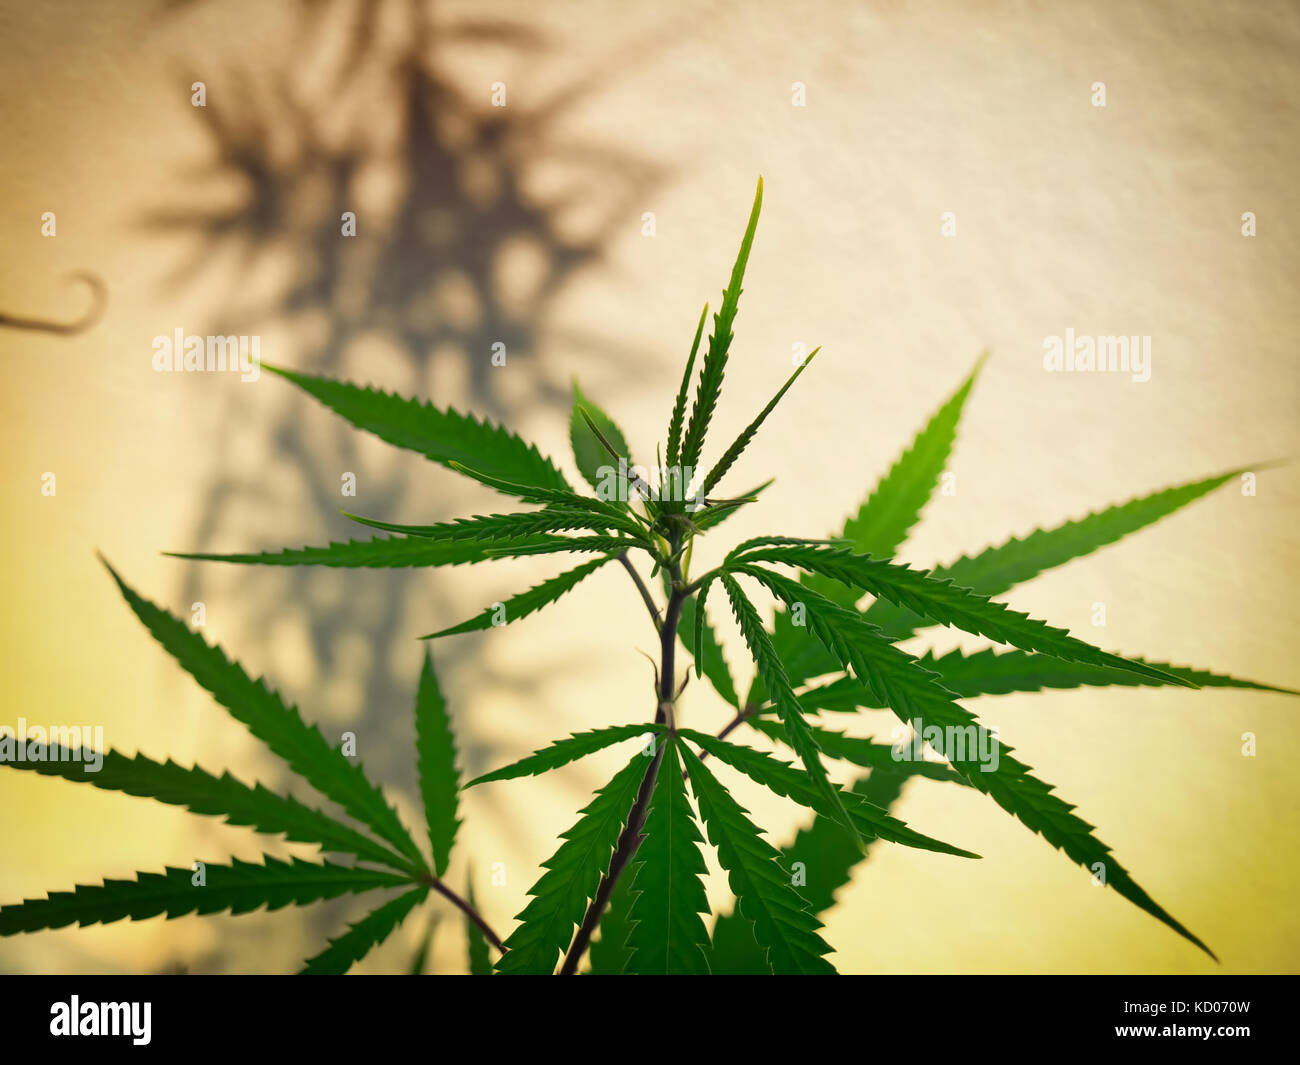 Artistic view on a Hemp or Cannabis plant. Stock Photo